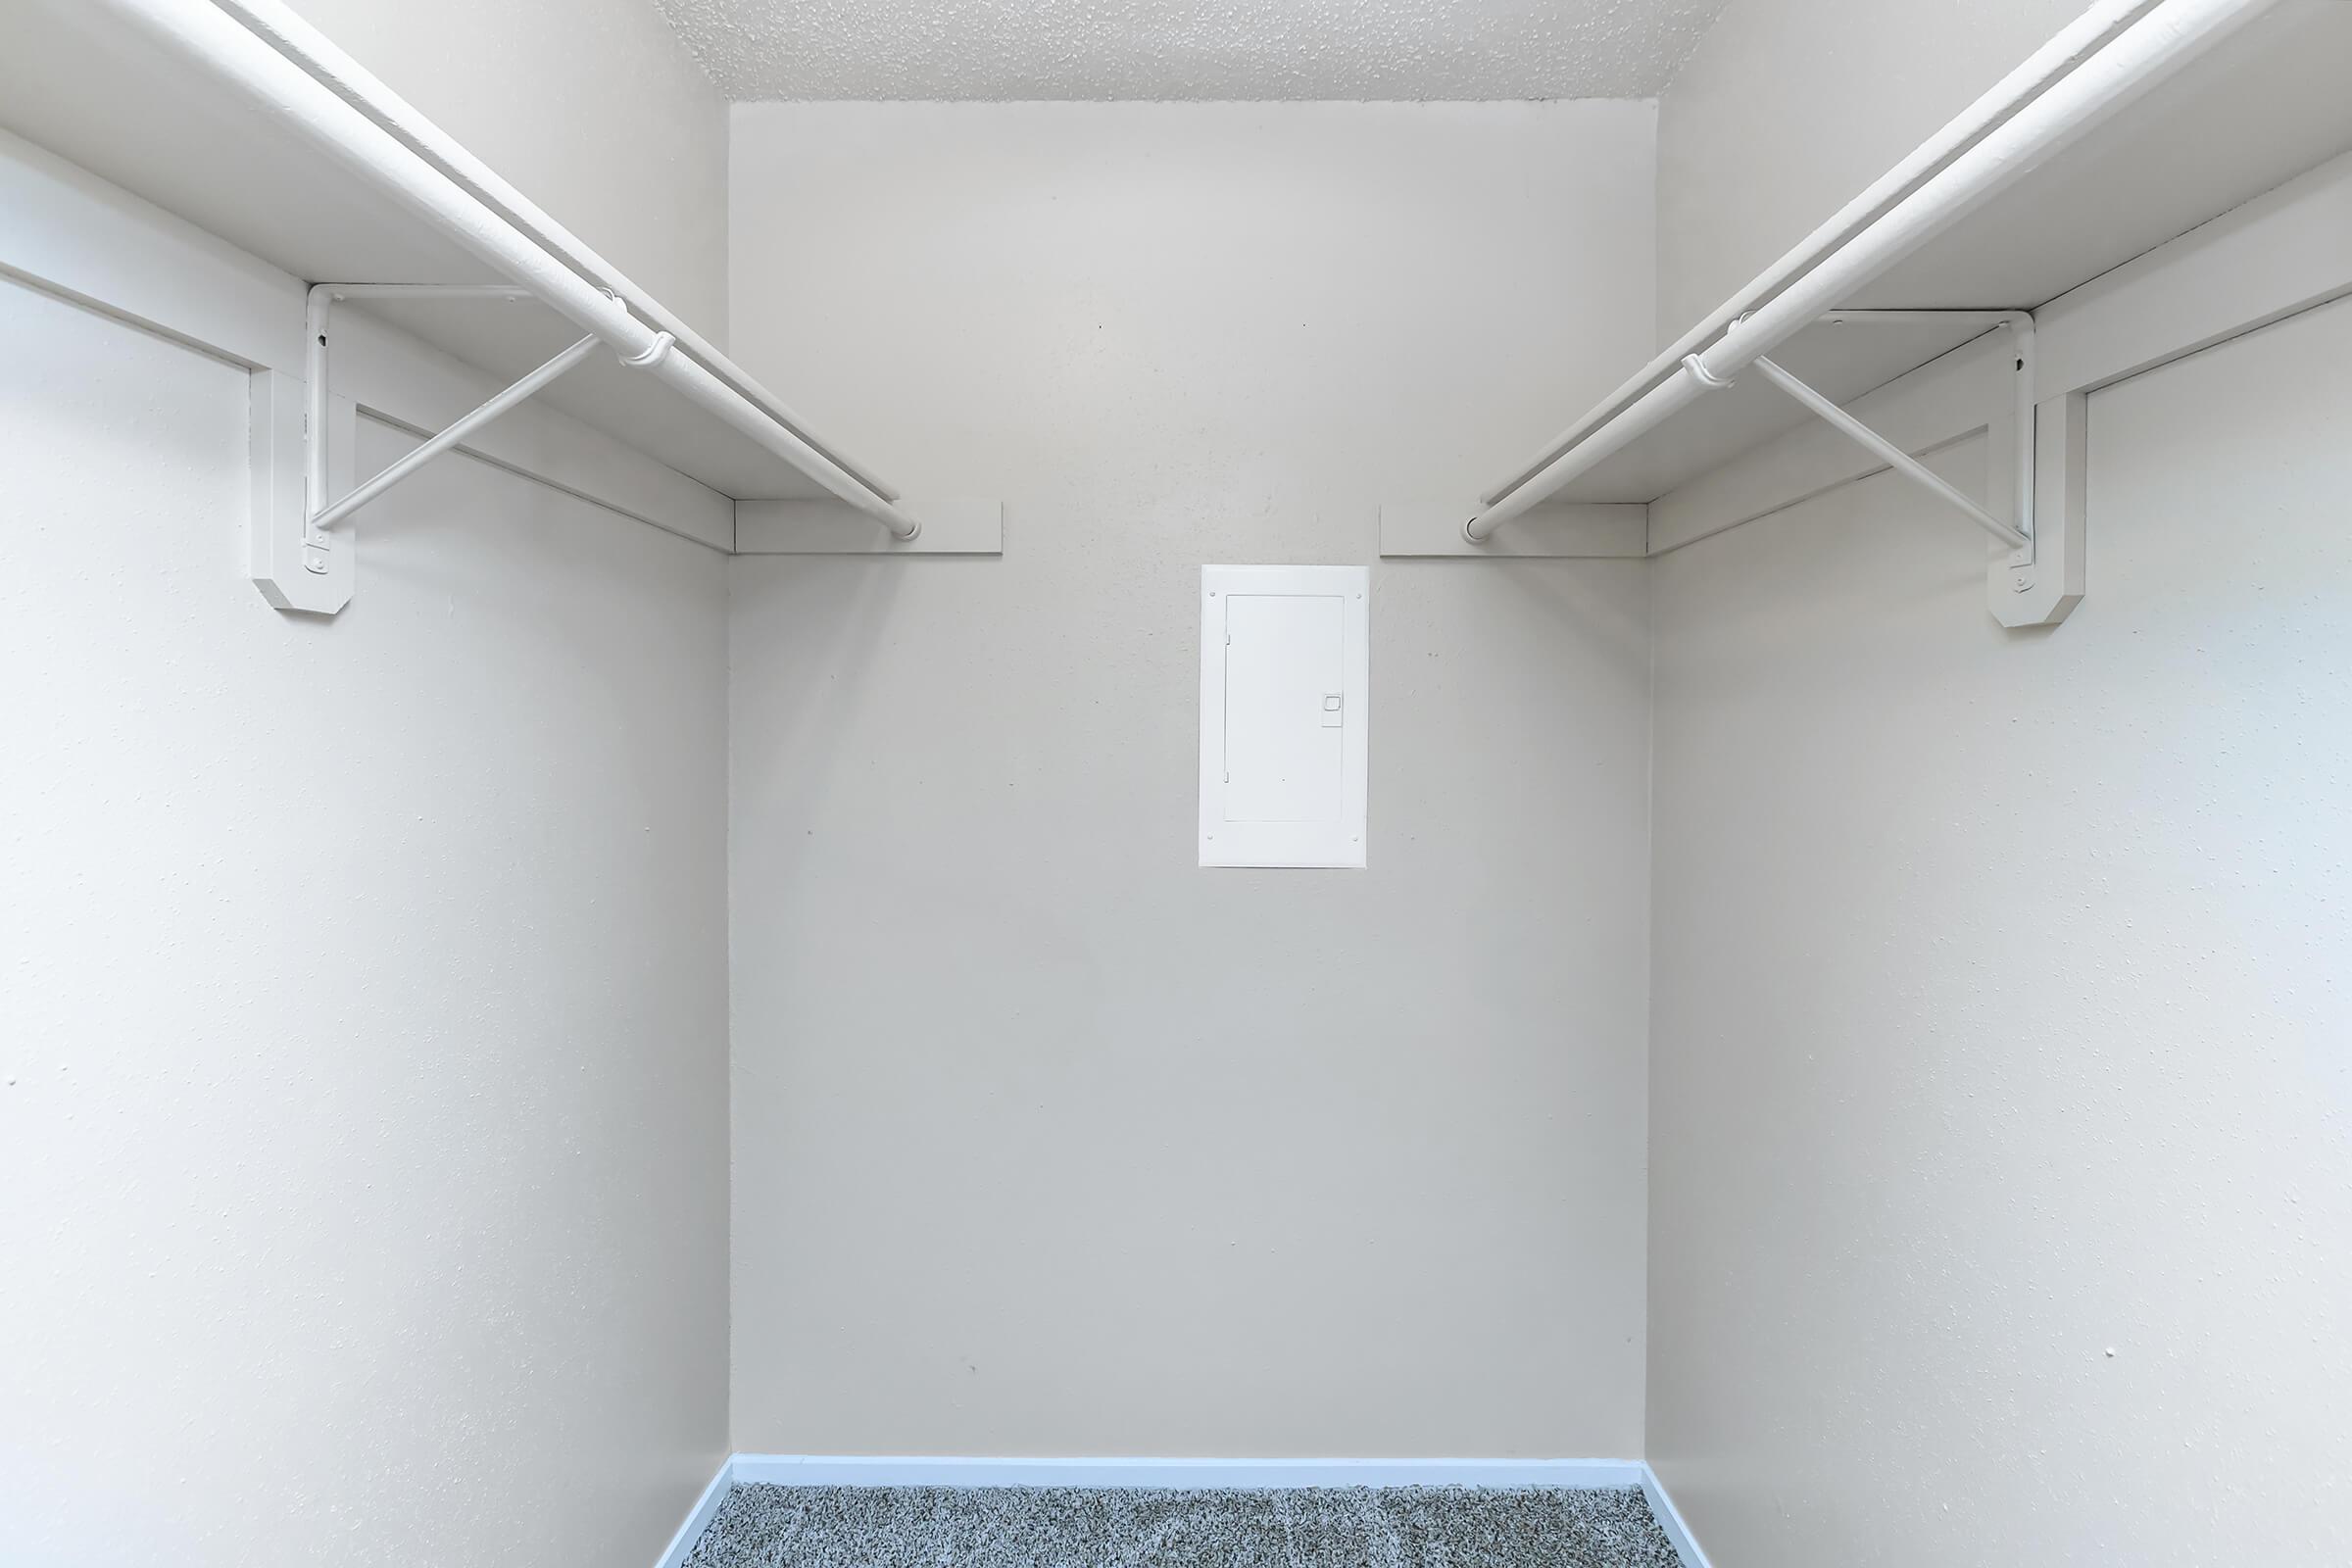 STORAGE ROOM WITHIN A ROOM